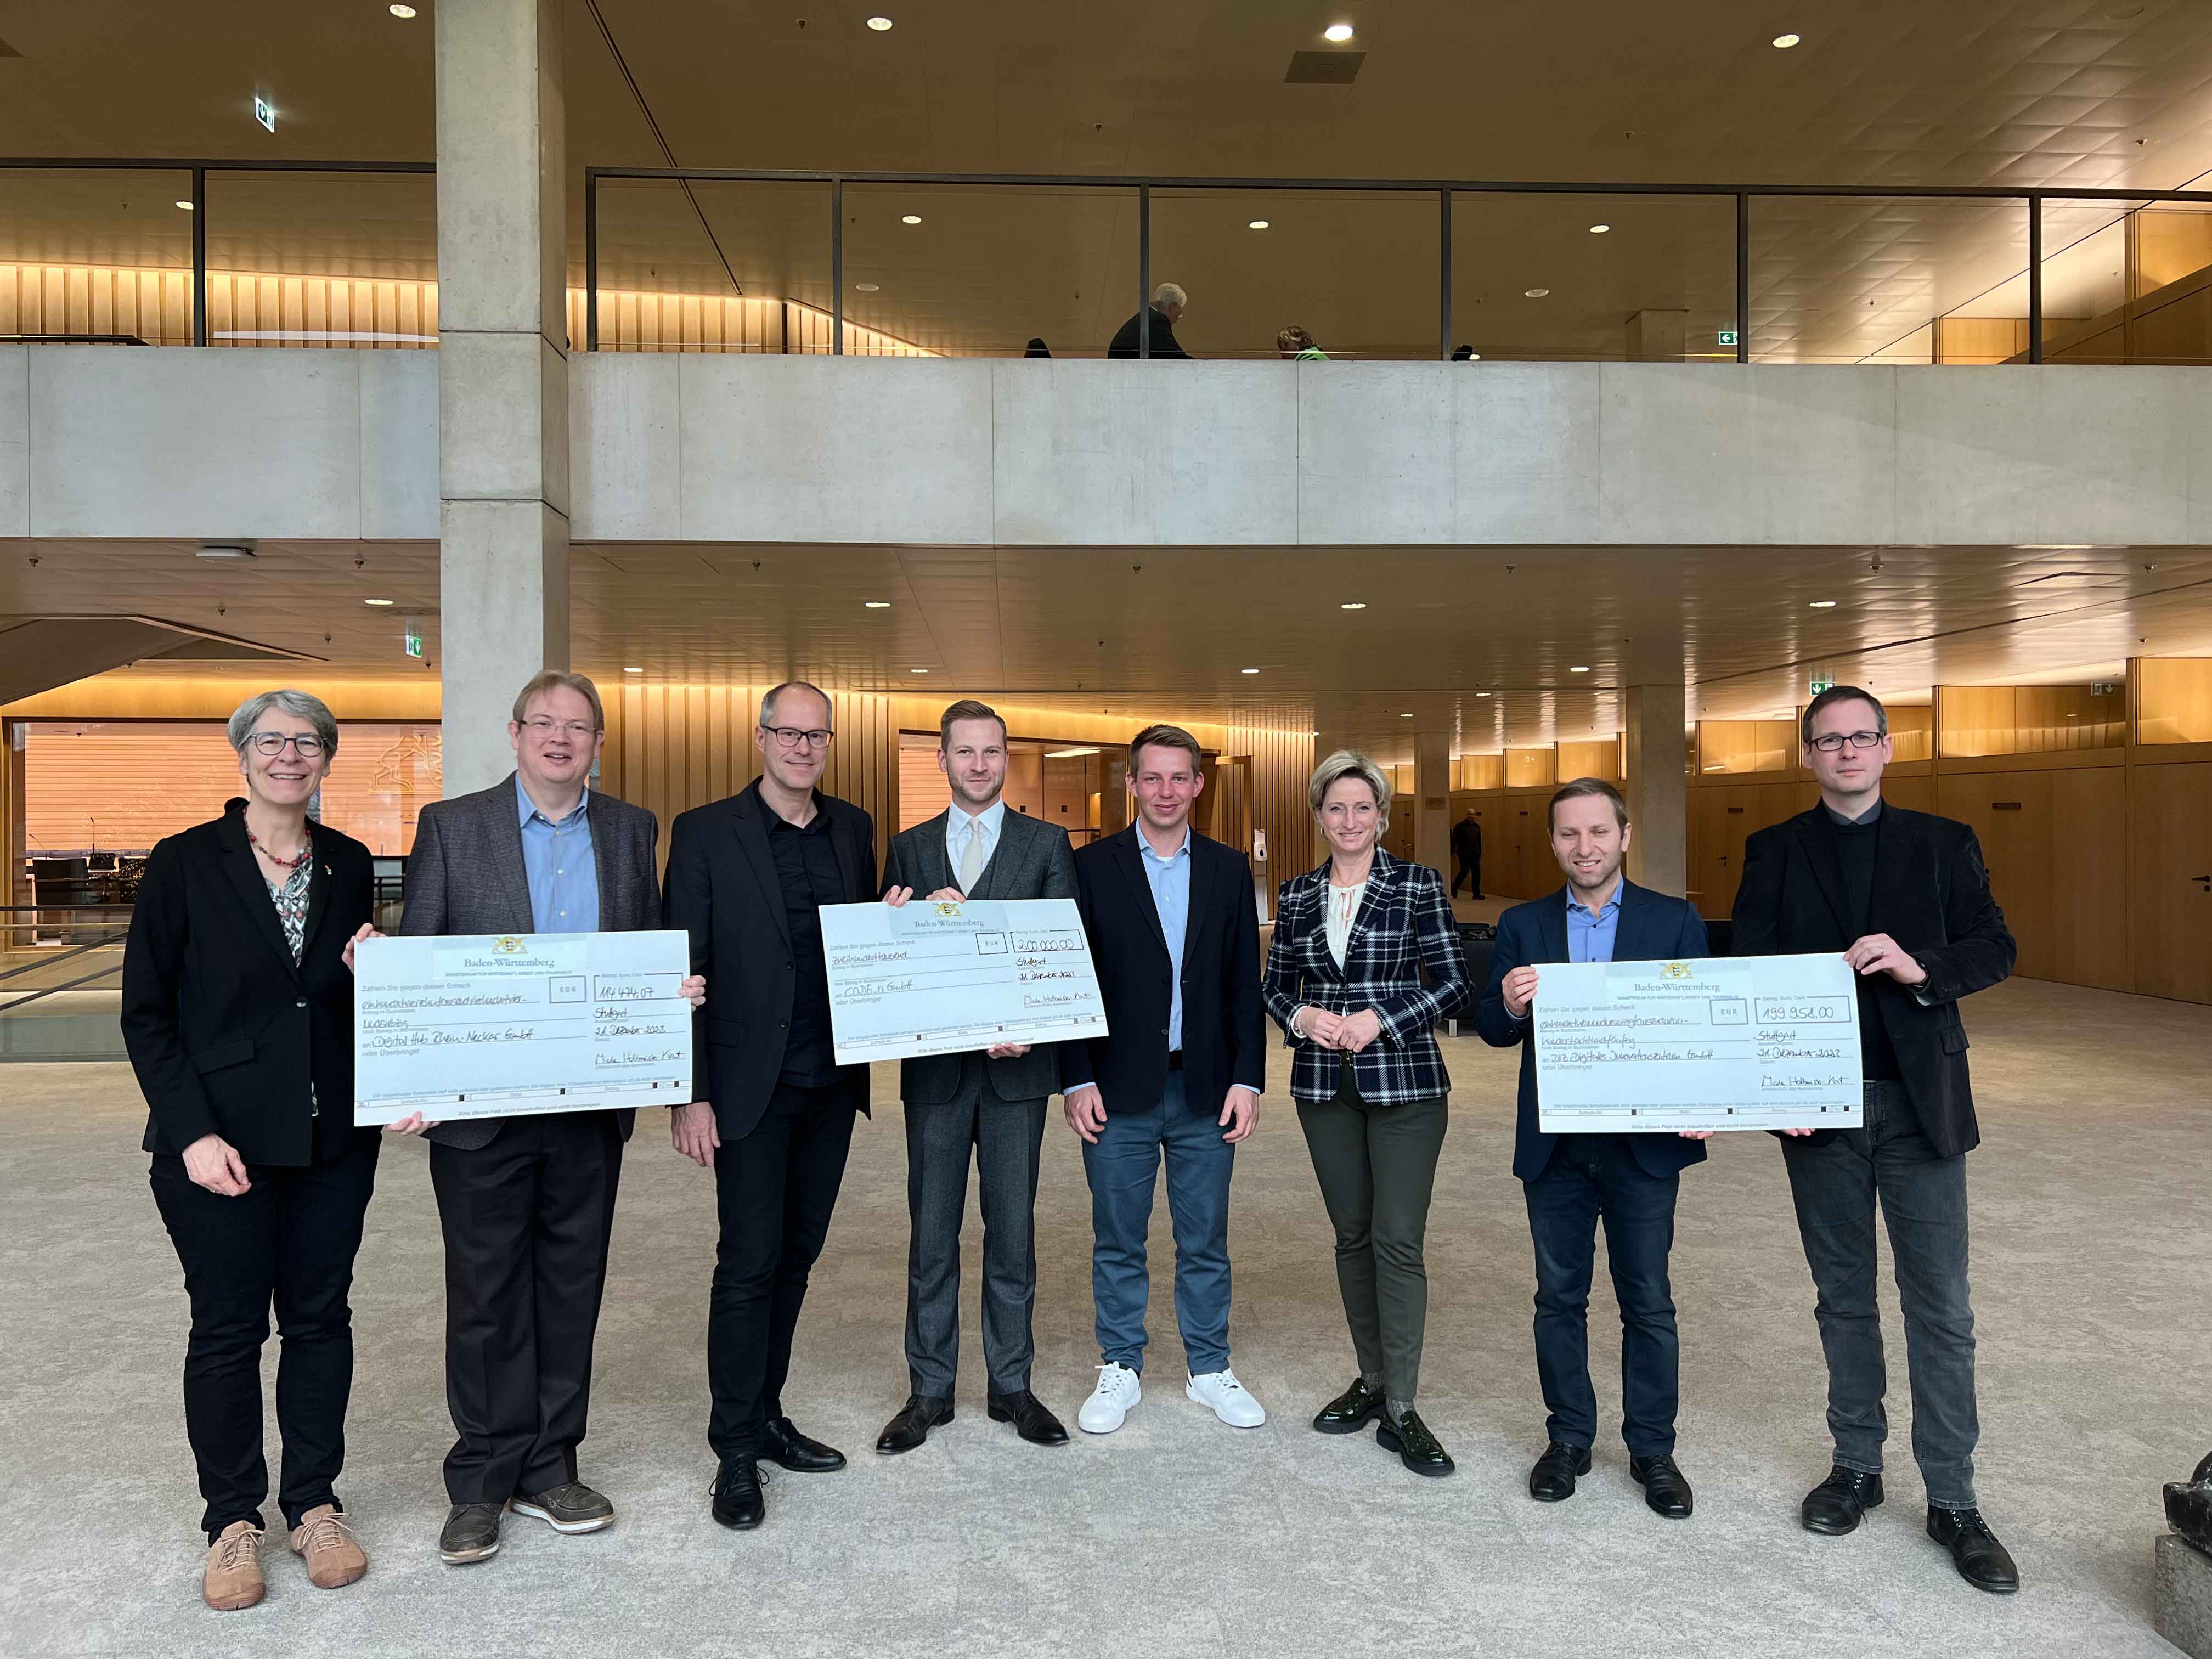 Baden-Württemberg continues to invest in innovation funding - Minister of Economic Affairs Hoffmeister-Kraut hands over funding decisions to de:hubs in Karlsruhe, Mannheim/Ludwigshafen and Stuttgart